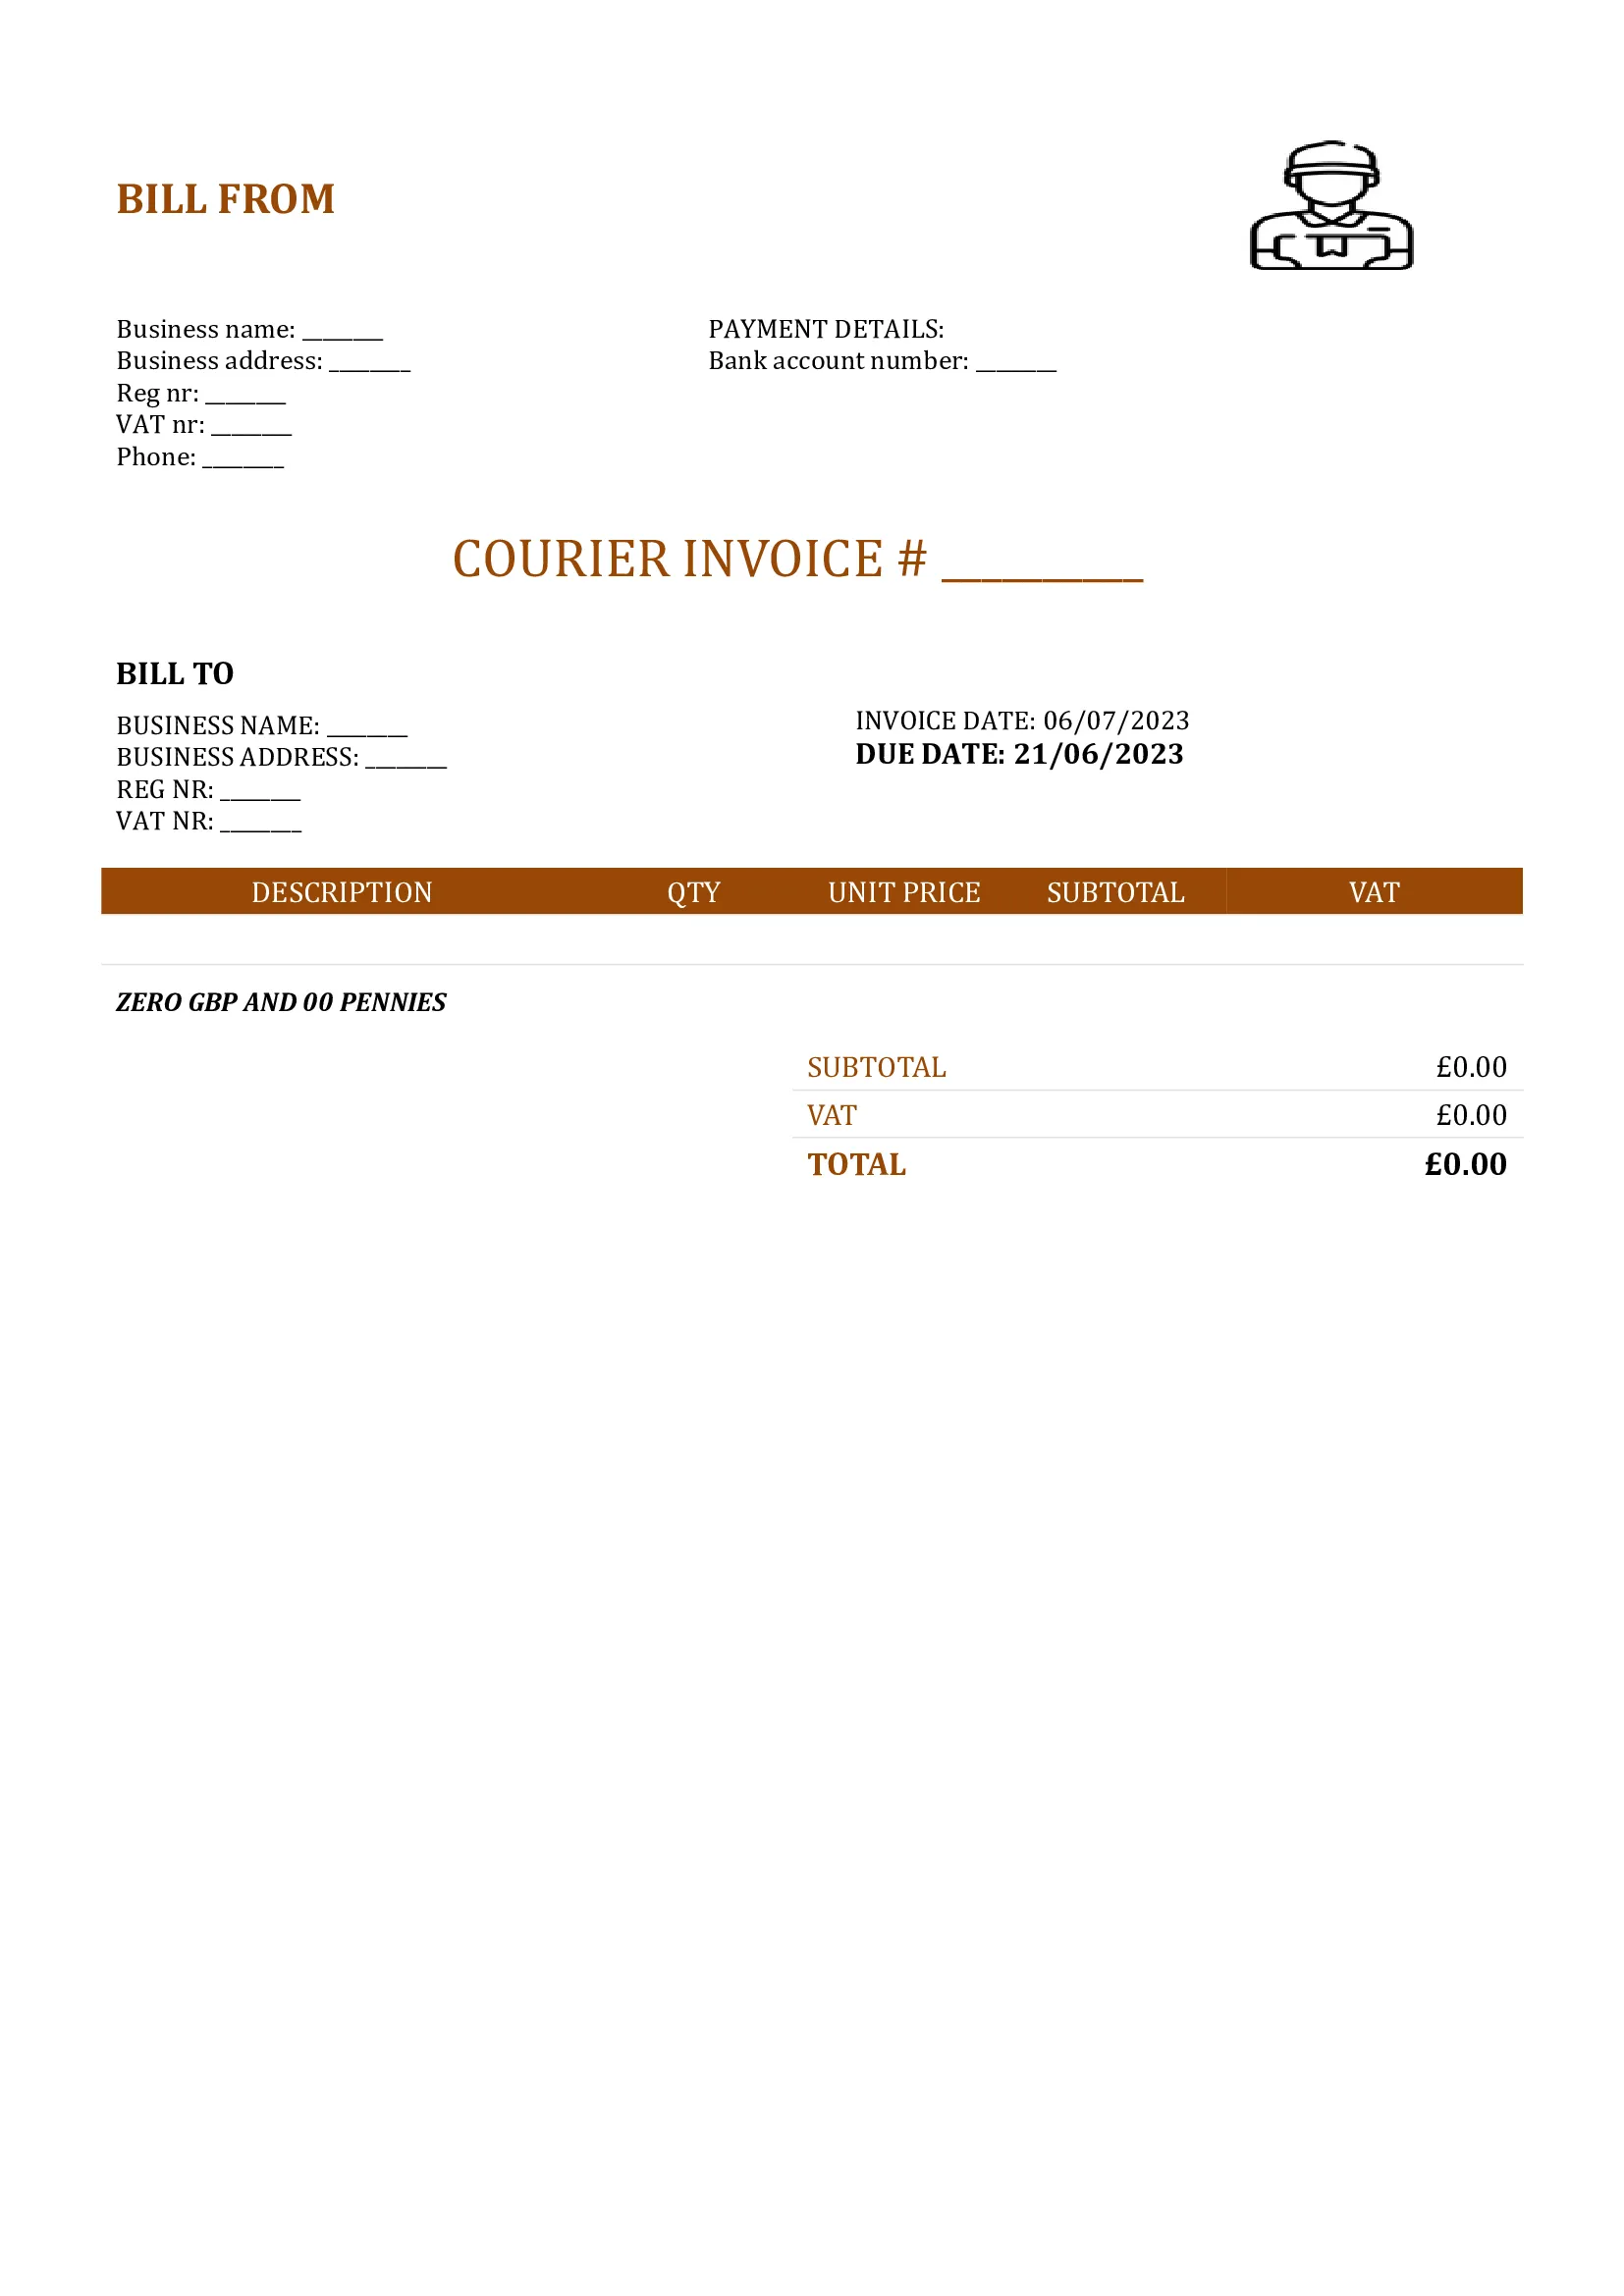 blank courier invoice template UK Word / Google docs